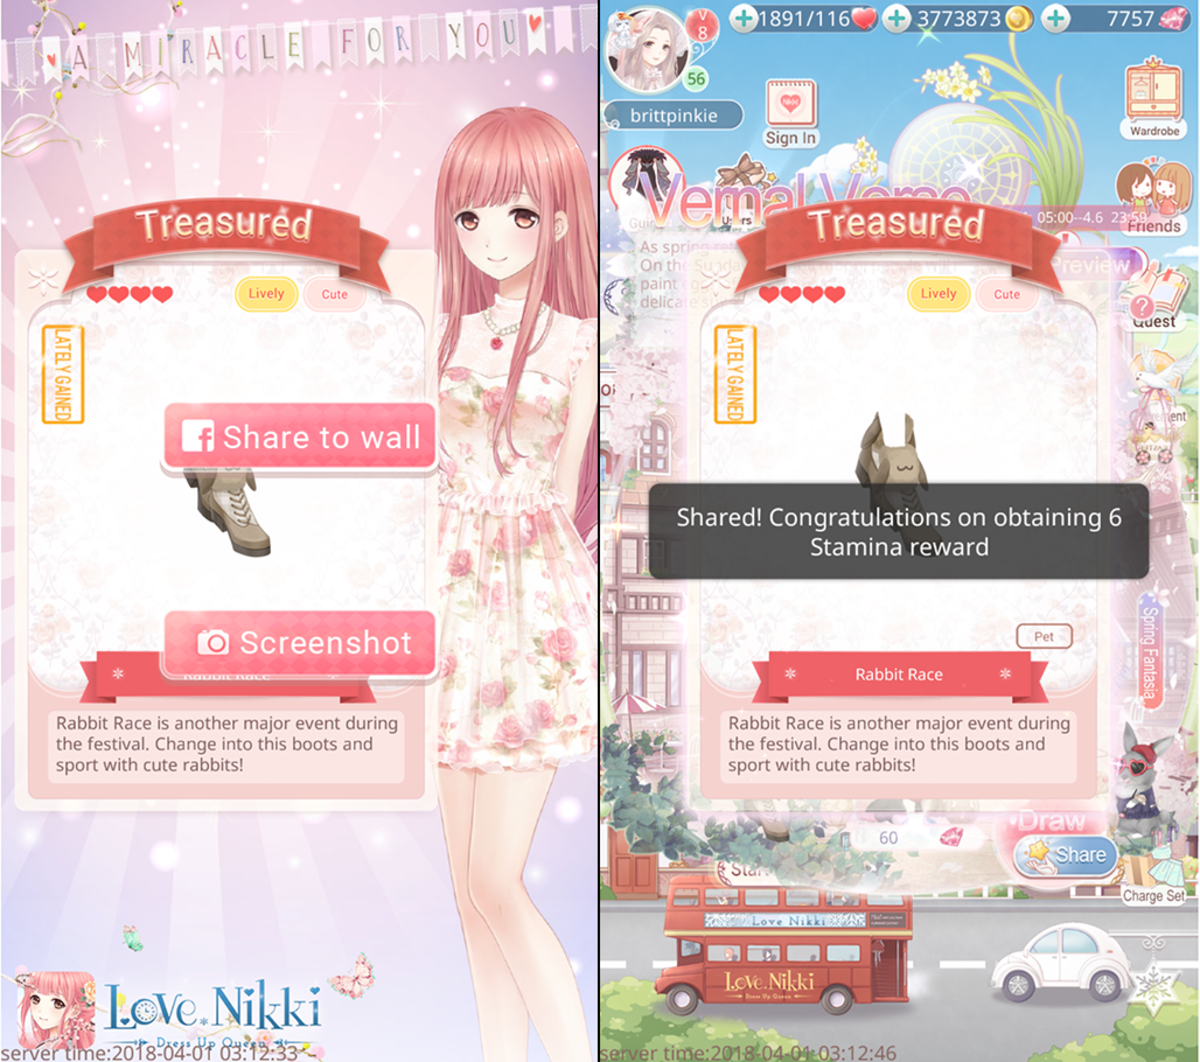 Click on the share button when you receive new items and dress up Nikki to get rewards!